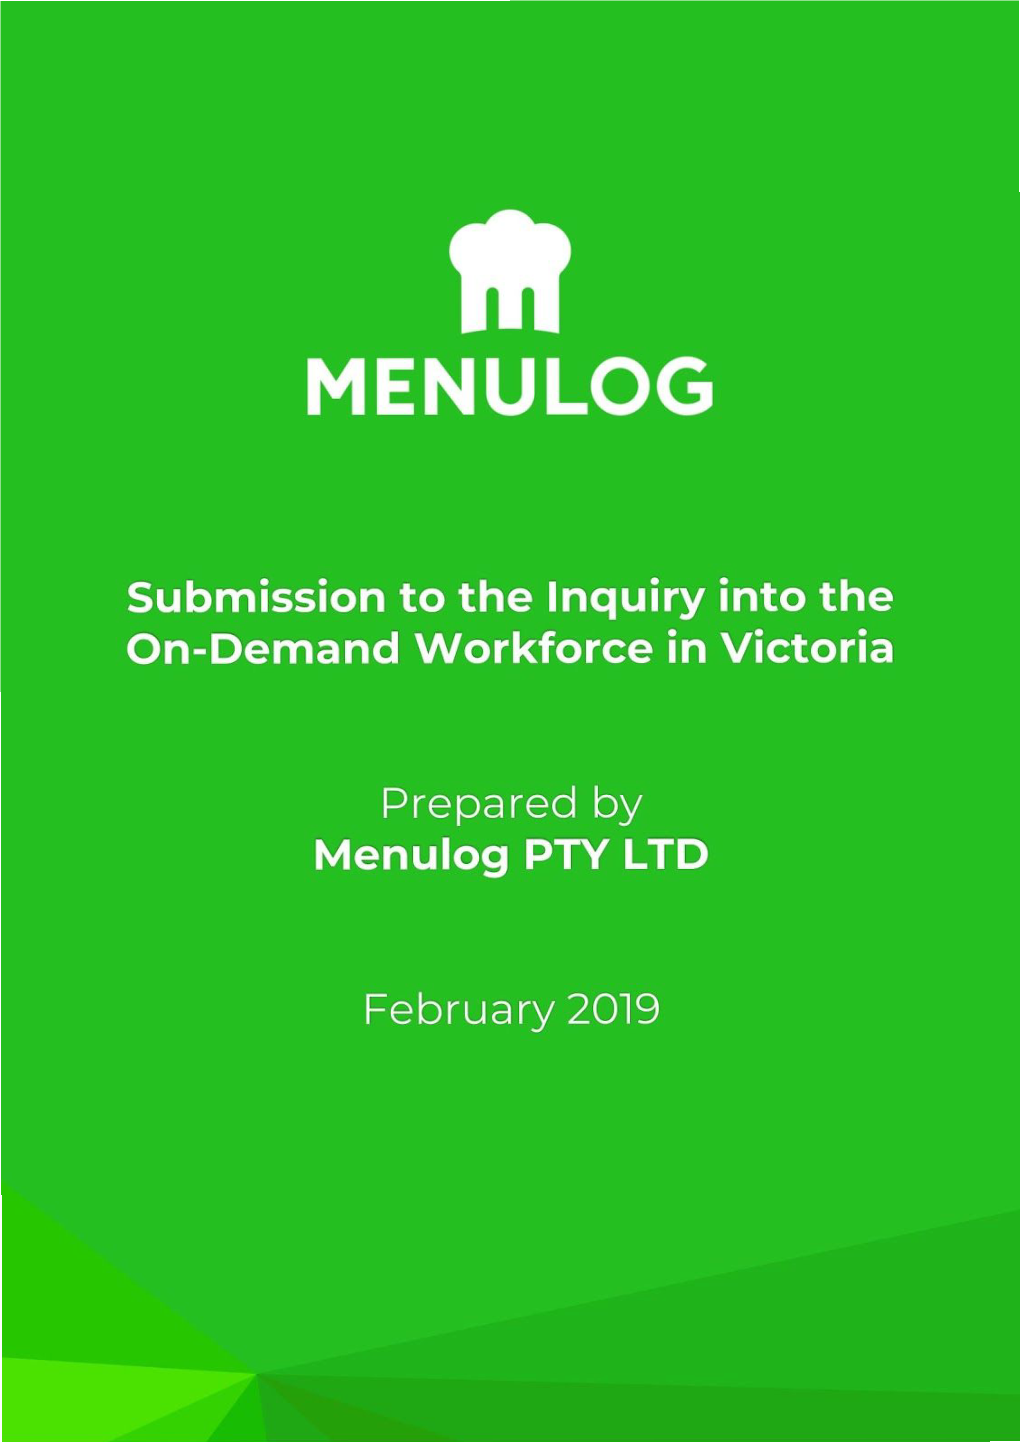 Menulog PTY LTD Submission to the Inquiry Into the On-Demand Workforce in Victoria